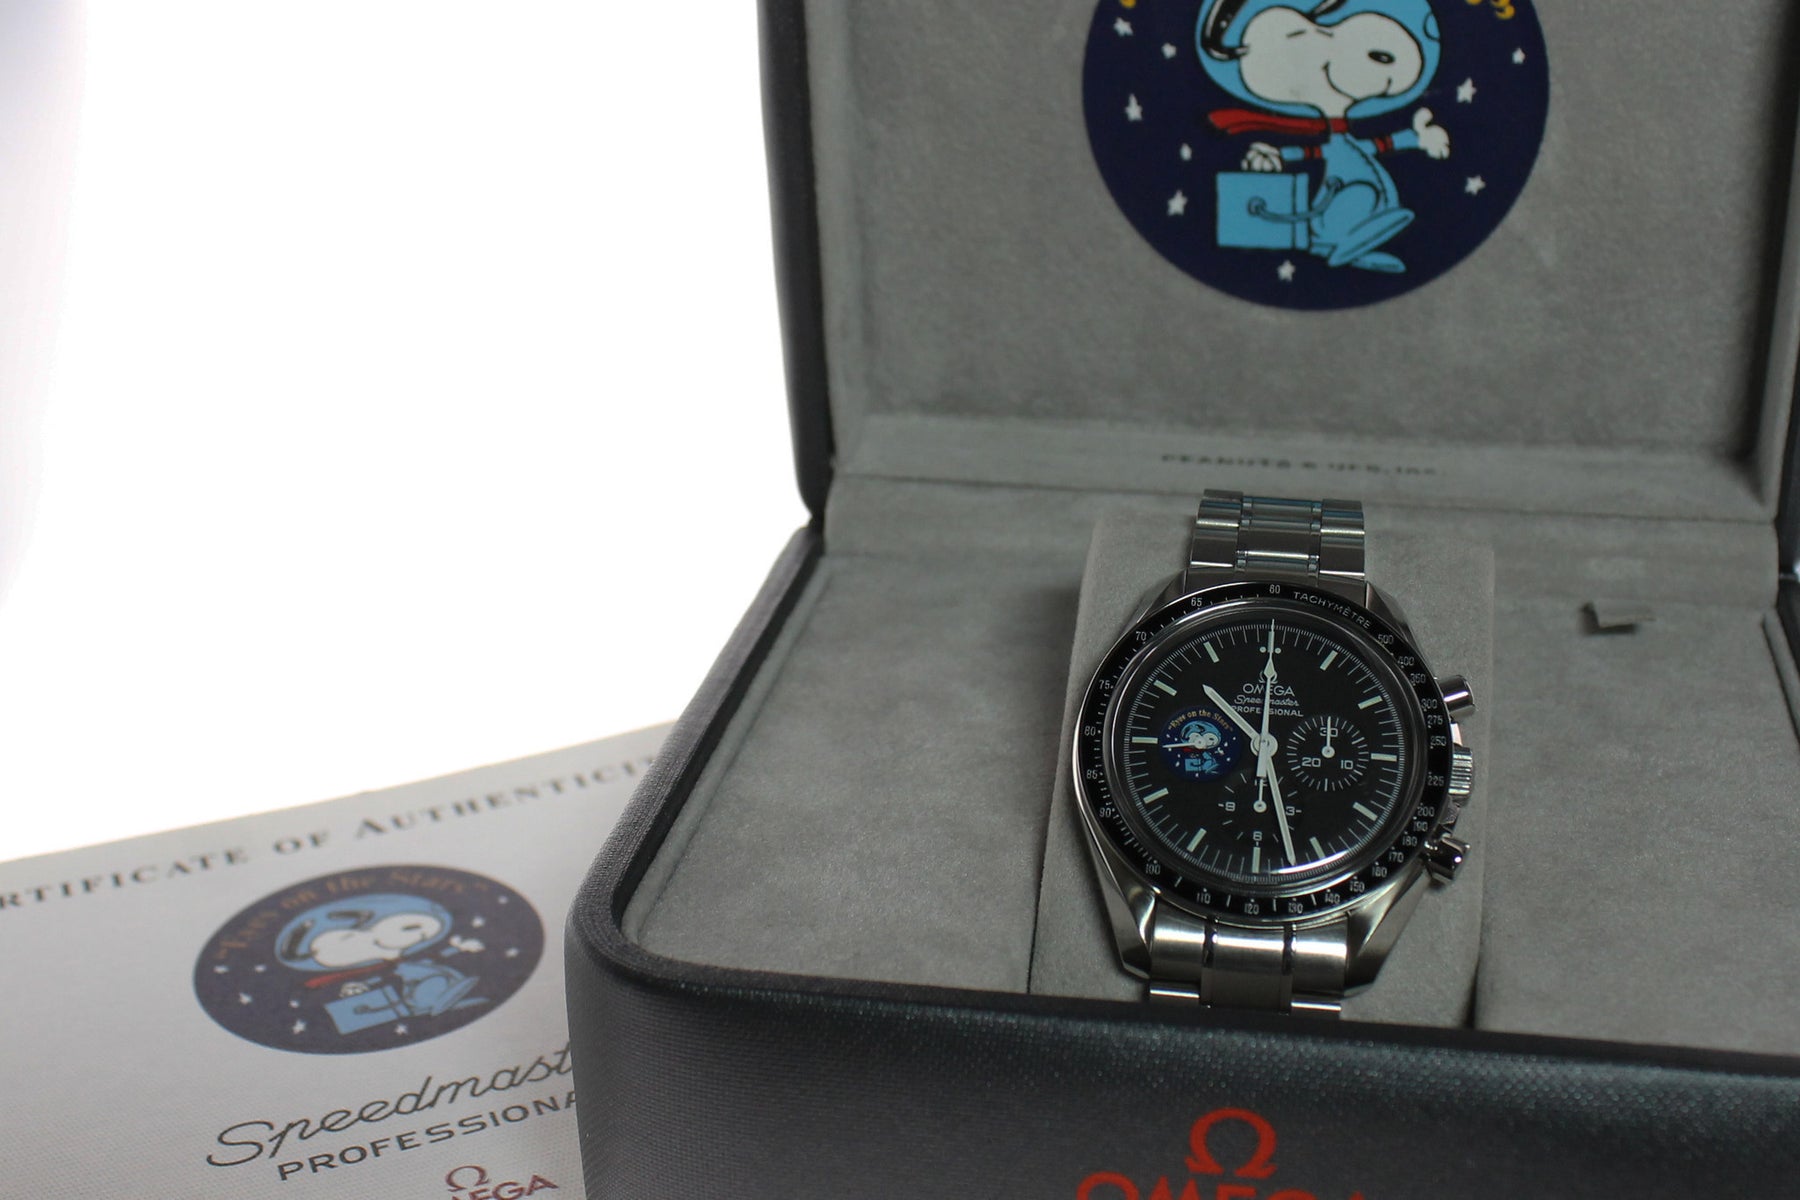 2005 - Omega Speedmaster Professional 'Snoopy' (with box and certificate) - Momentum Dubai